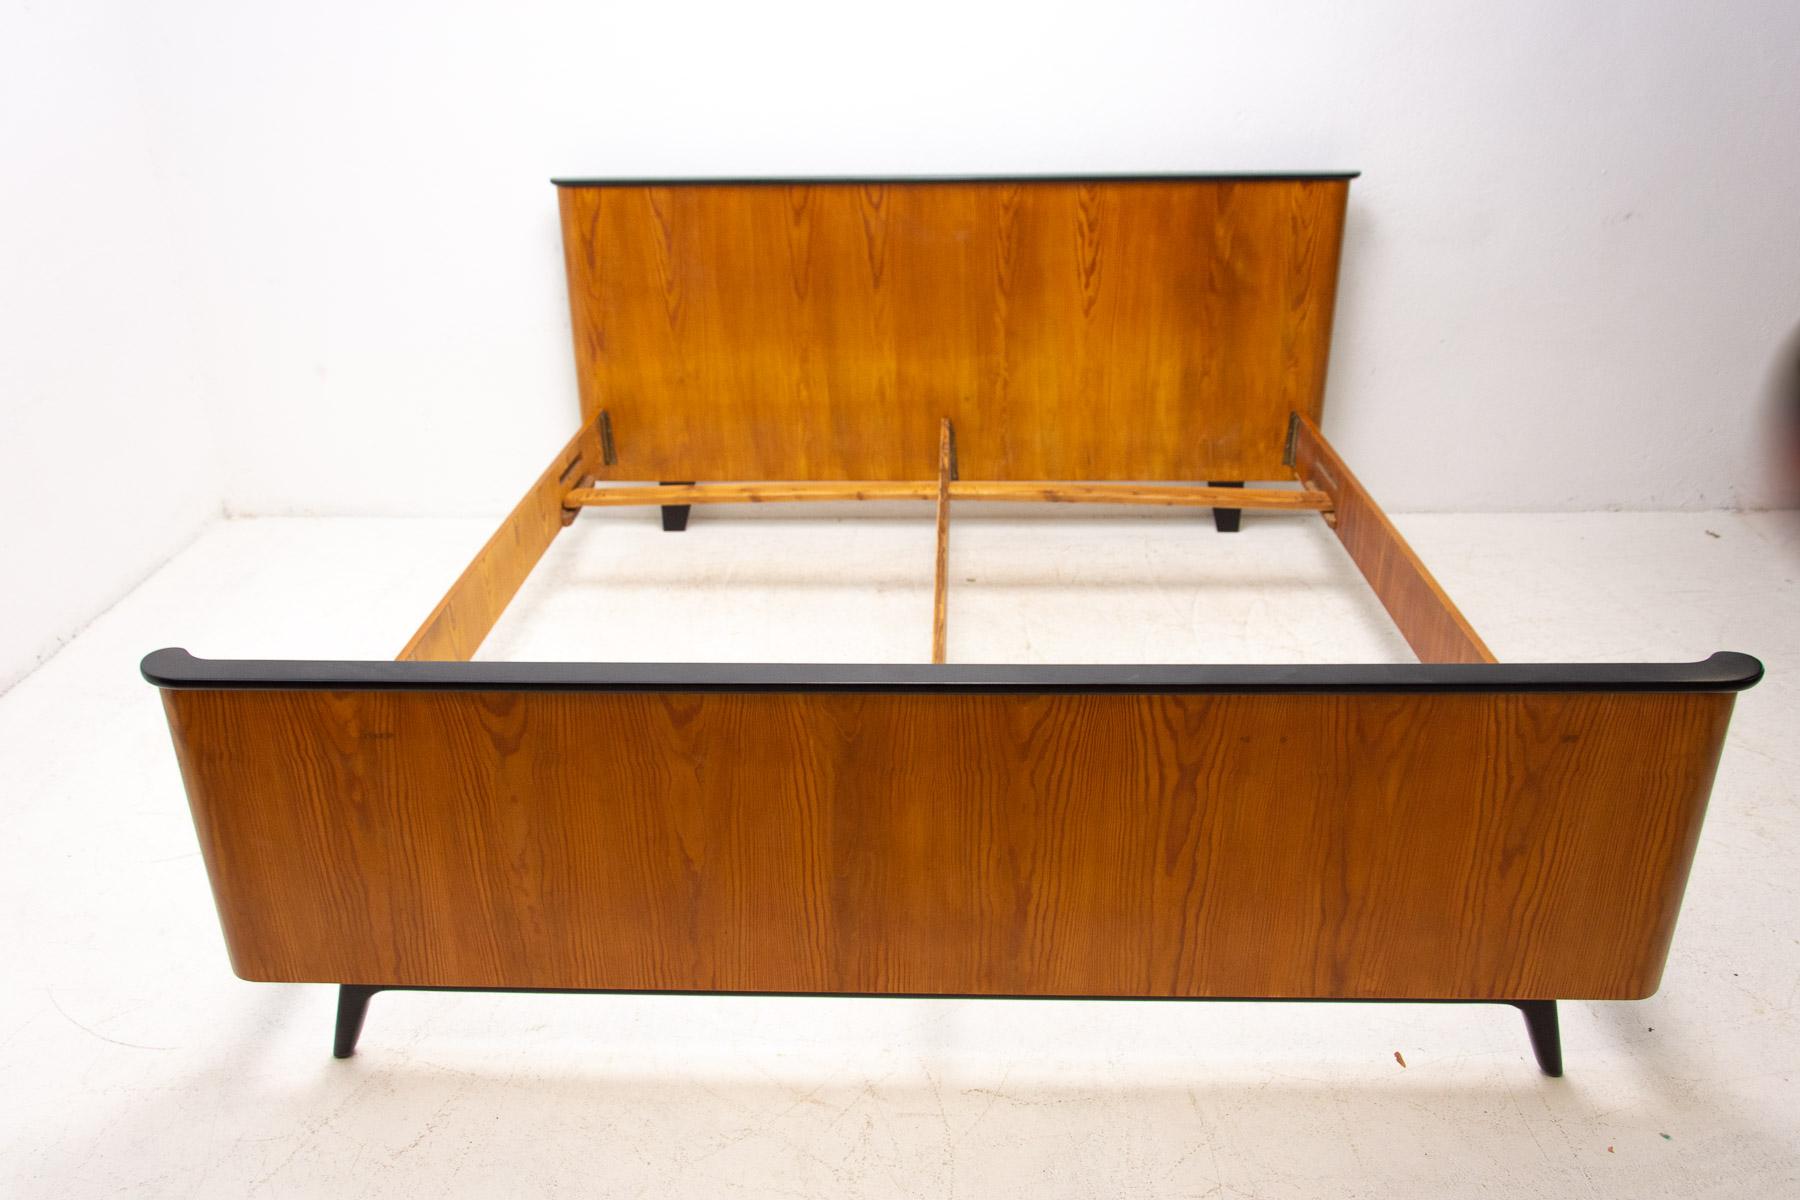 Functionalist double bed designed by Jindrich Halabala for UP Závody in the 1950´s.
It has an outstanding timeless design. It´s made of pine wood.
In excelent condition, fully refursbished.

The dimensions of the sleeping space for mattresses